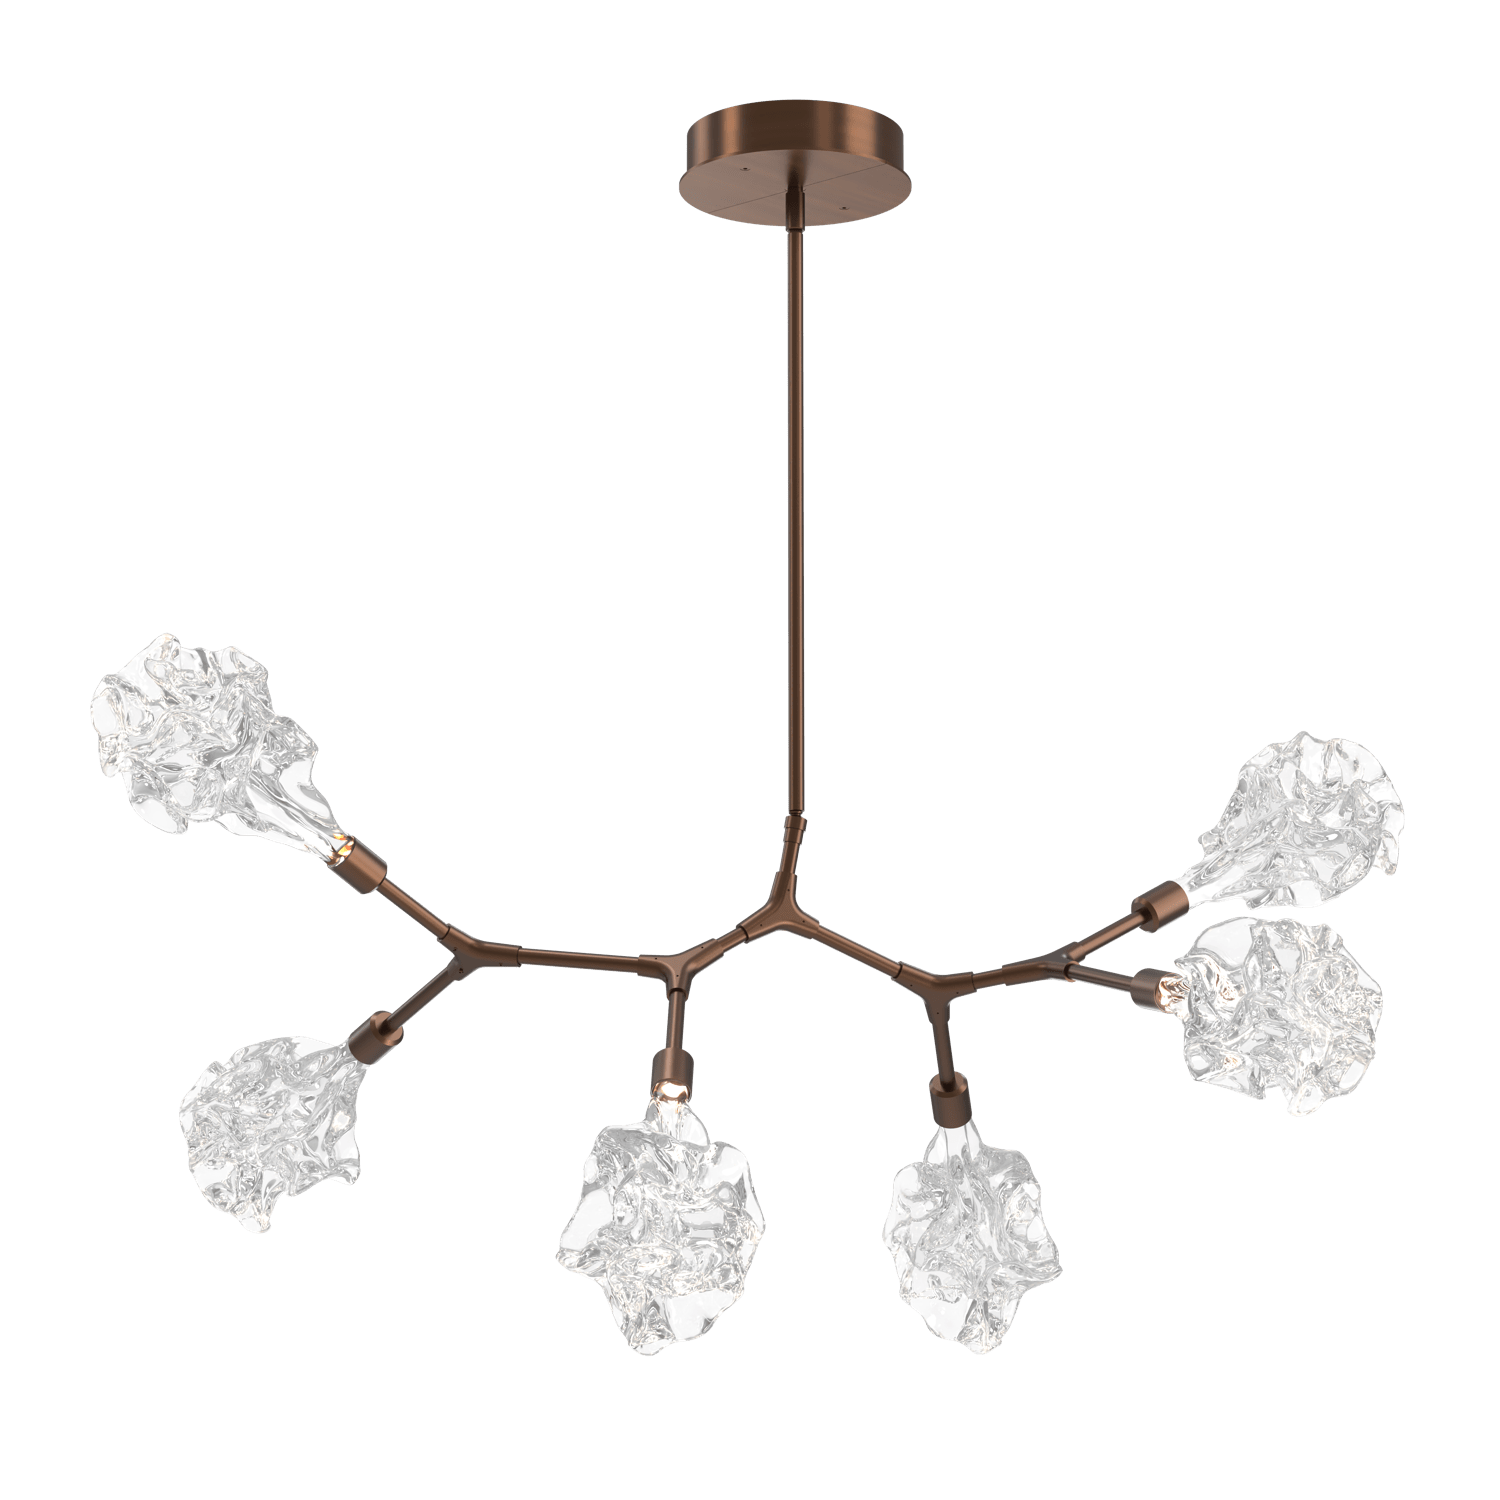 PLB0059-BA-RB-Hammerton-Studio-Blossom-6-light-organic-branch-chandelier-with-oil-rubbed-bronze-finish-and-clear-handblown-crystal-glass-shades-and-LED-lamping